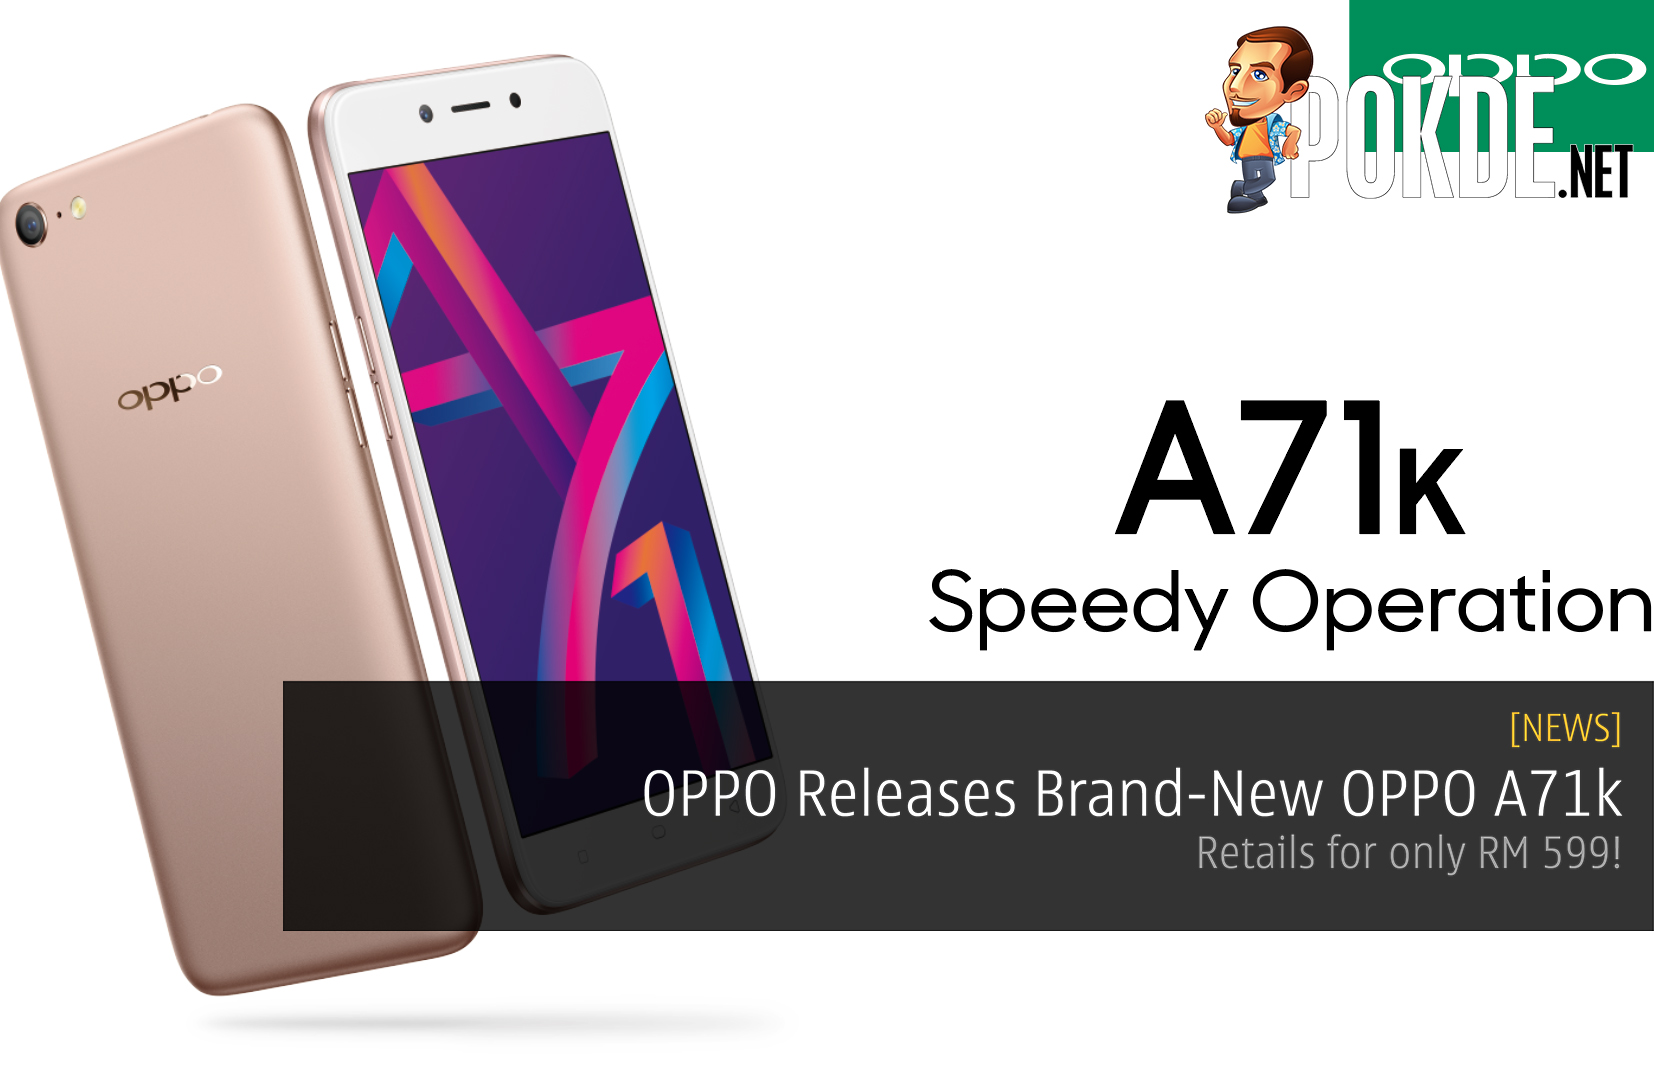 OPPO Releases Brand-New OPPO A71k - Retails for only RM 599! 38